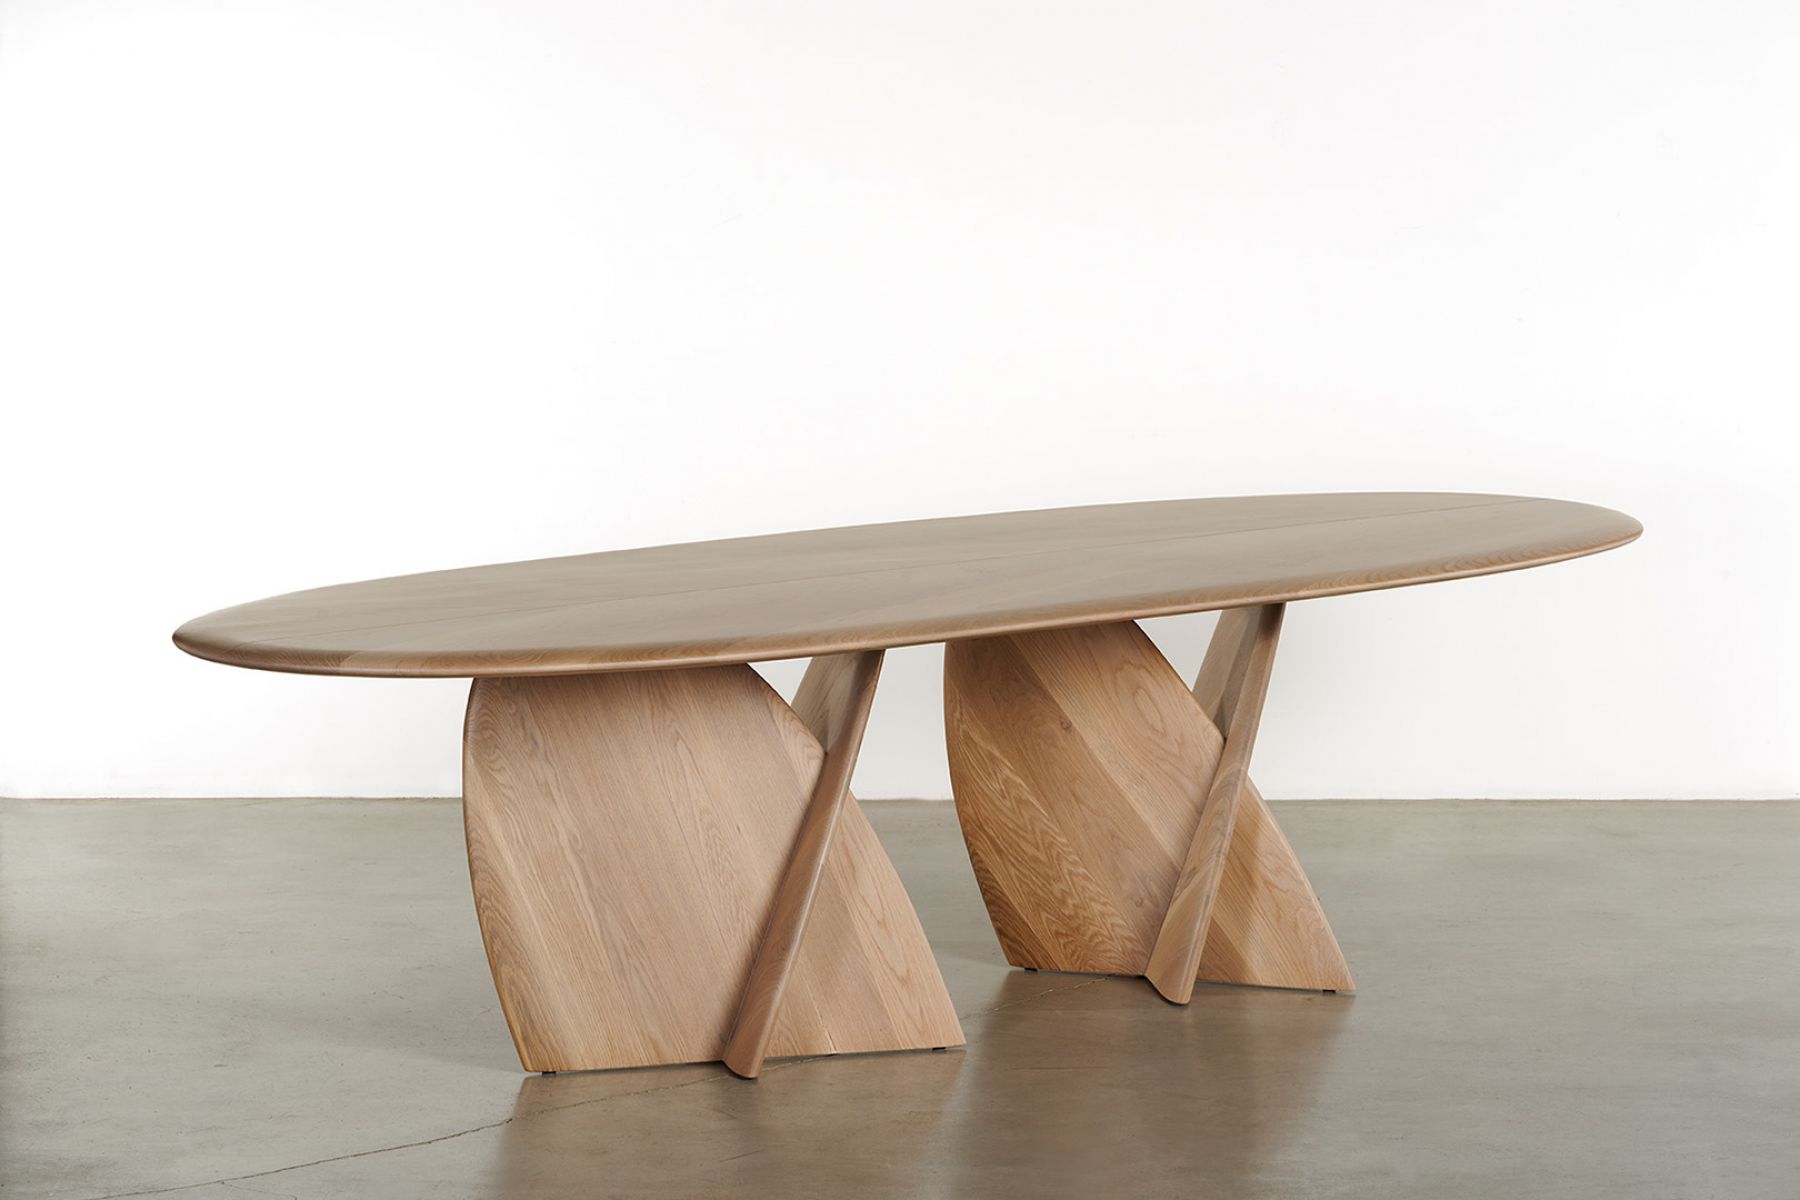 Dining table Whitish Collide Gal  Gaon Architect pic-1